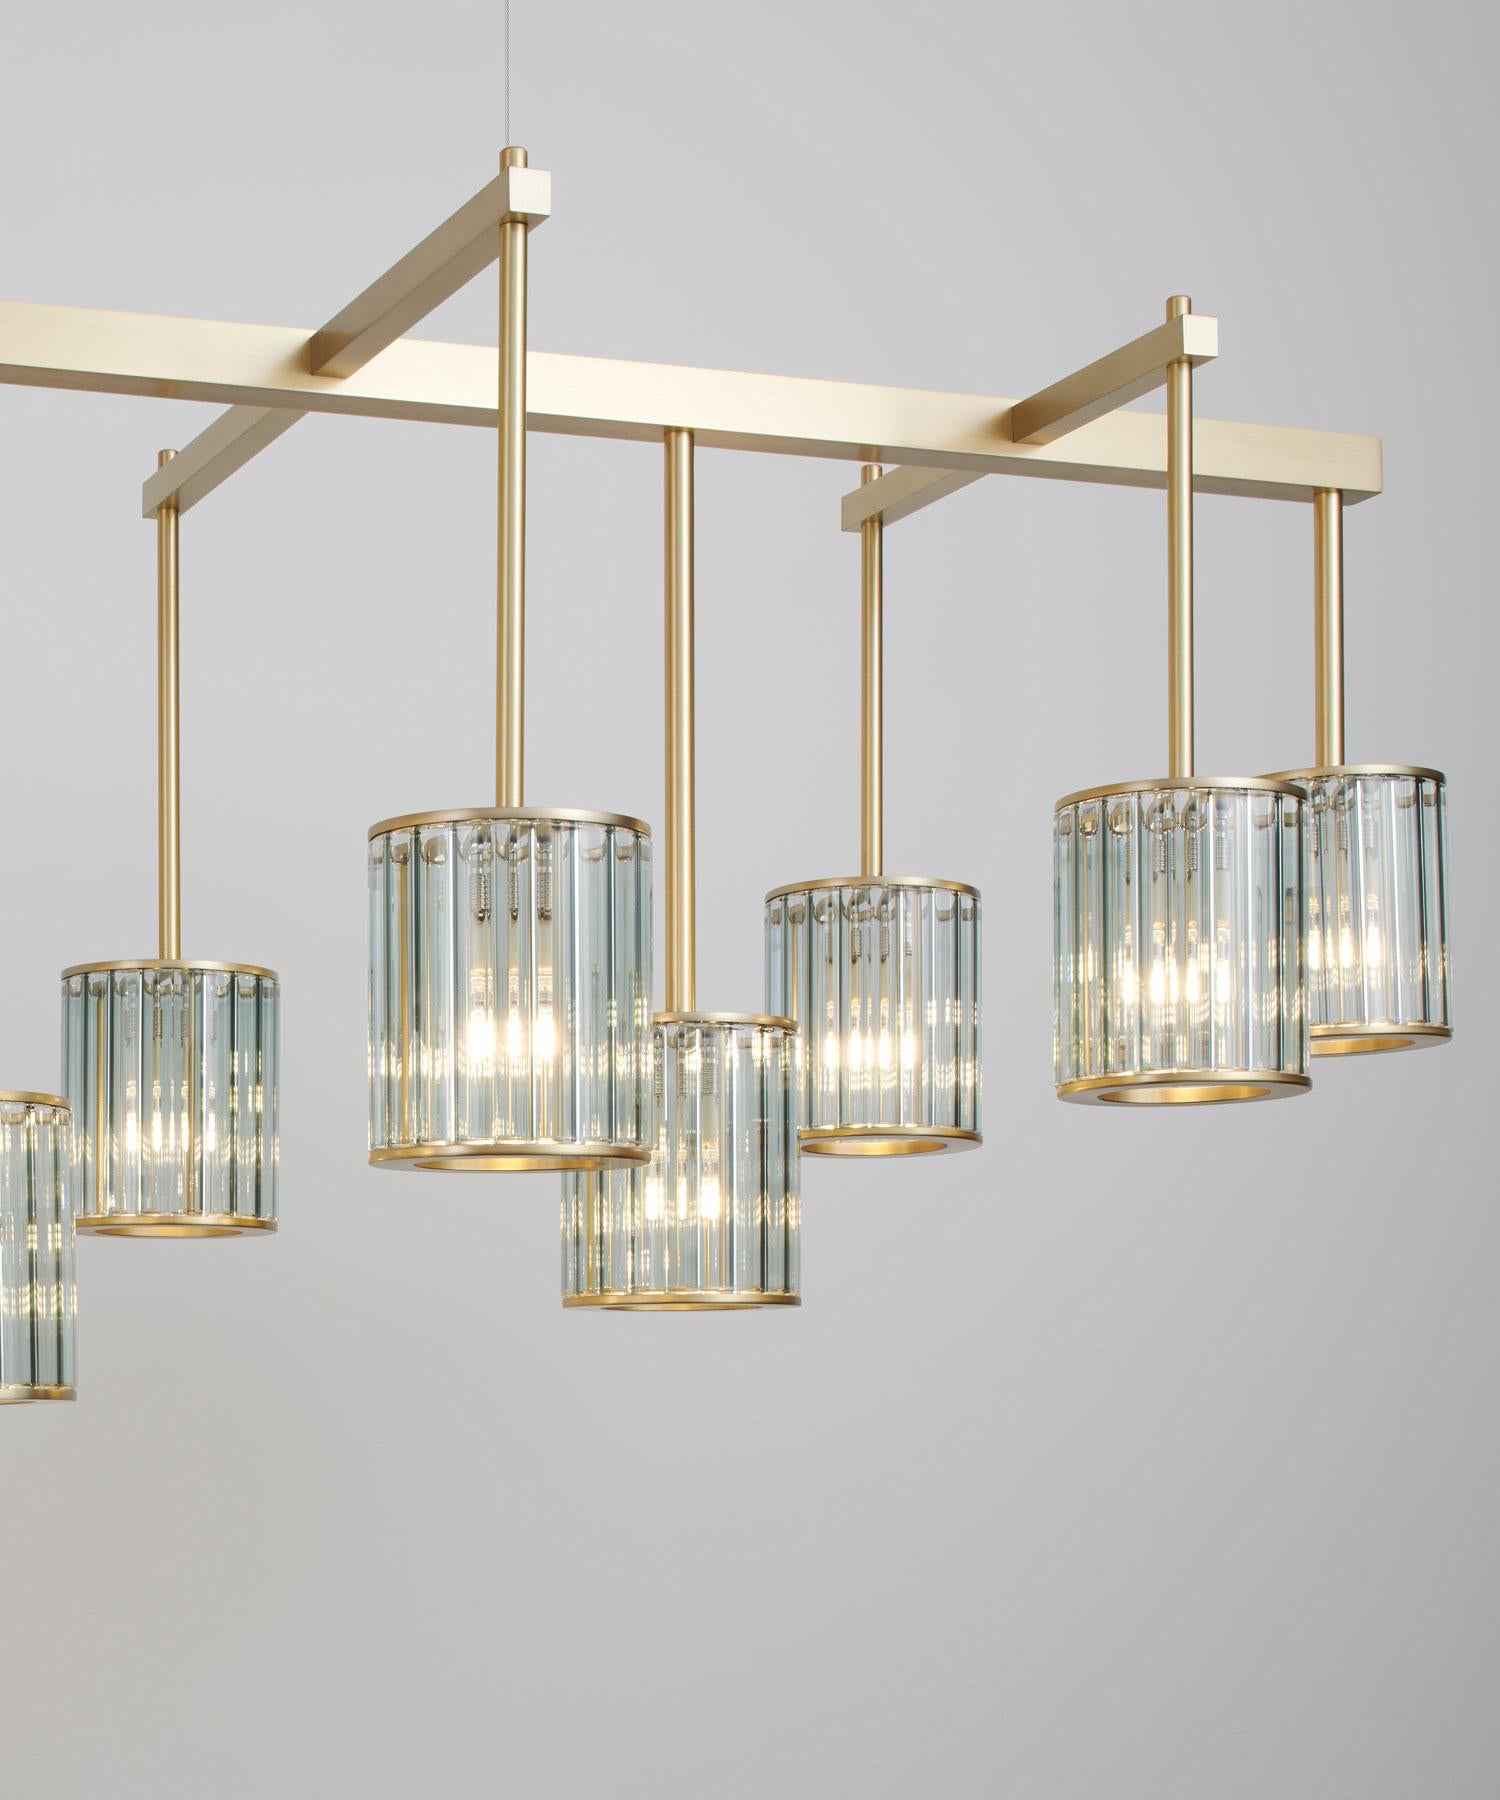 British Flute Beam Chandelier with 16 Arms in Brushed Brass and Smoke Glass Diffusers  For Sale